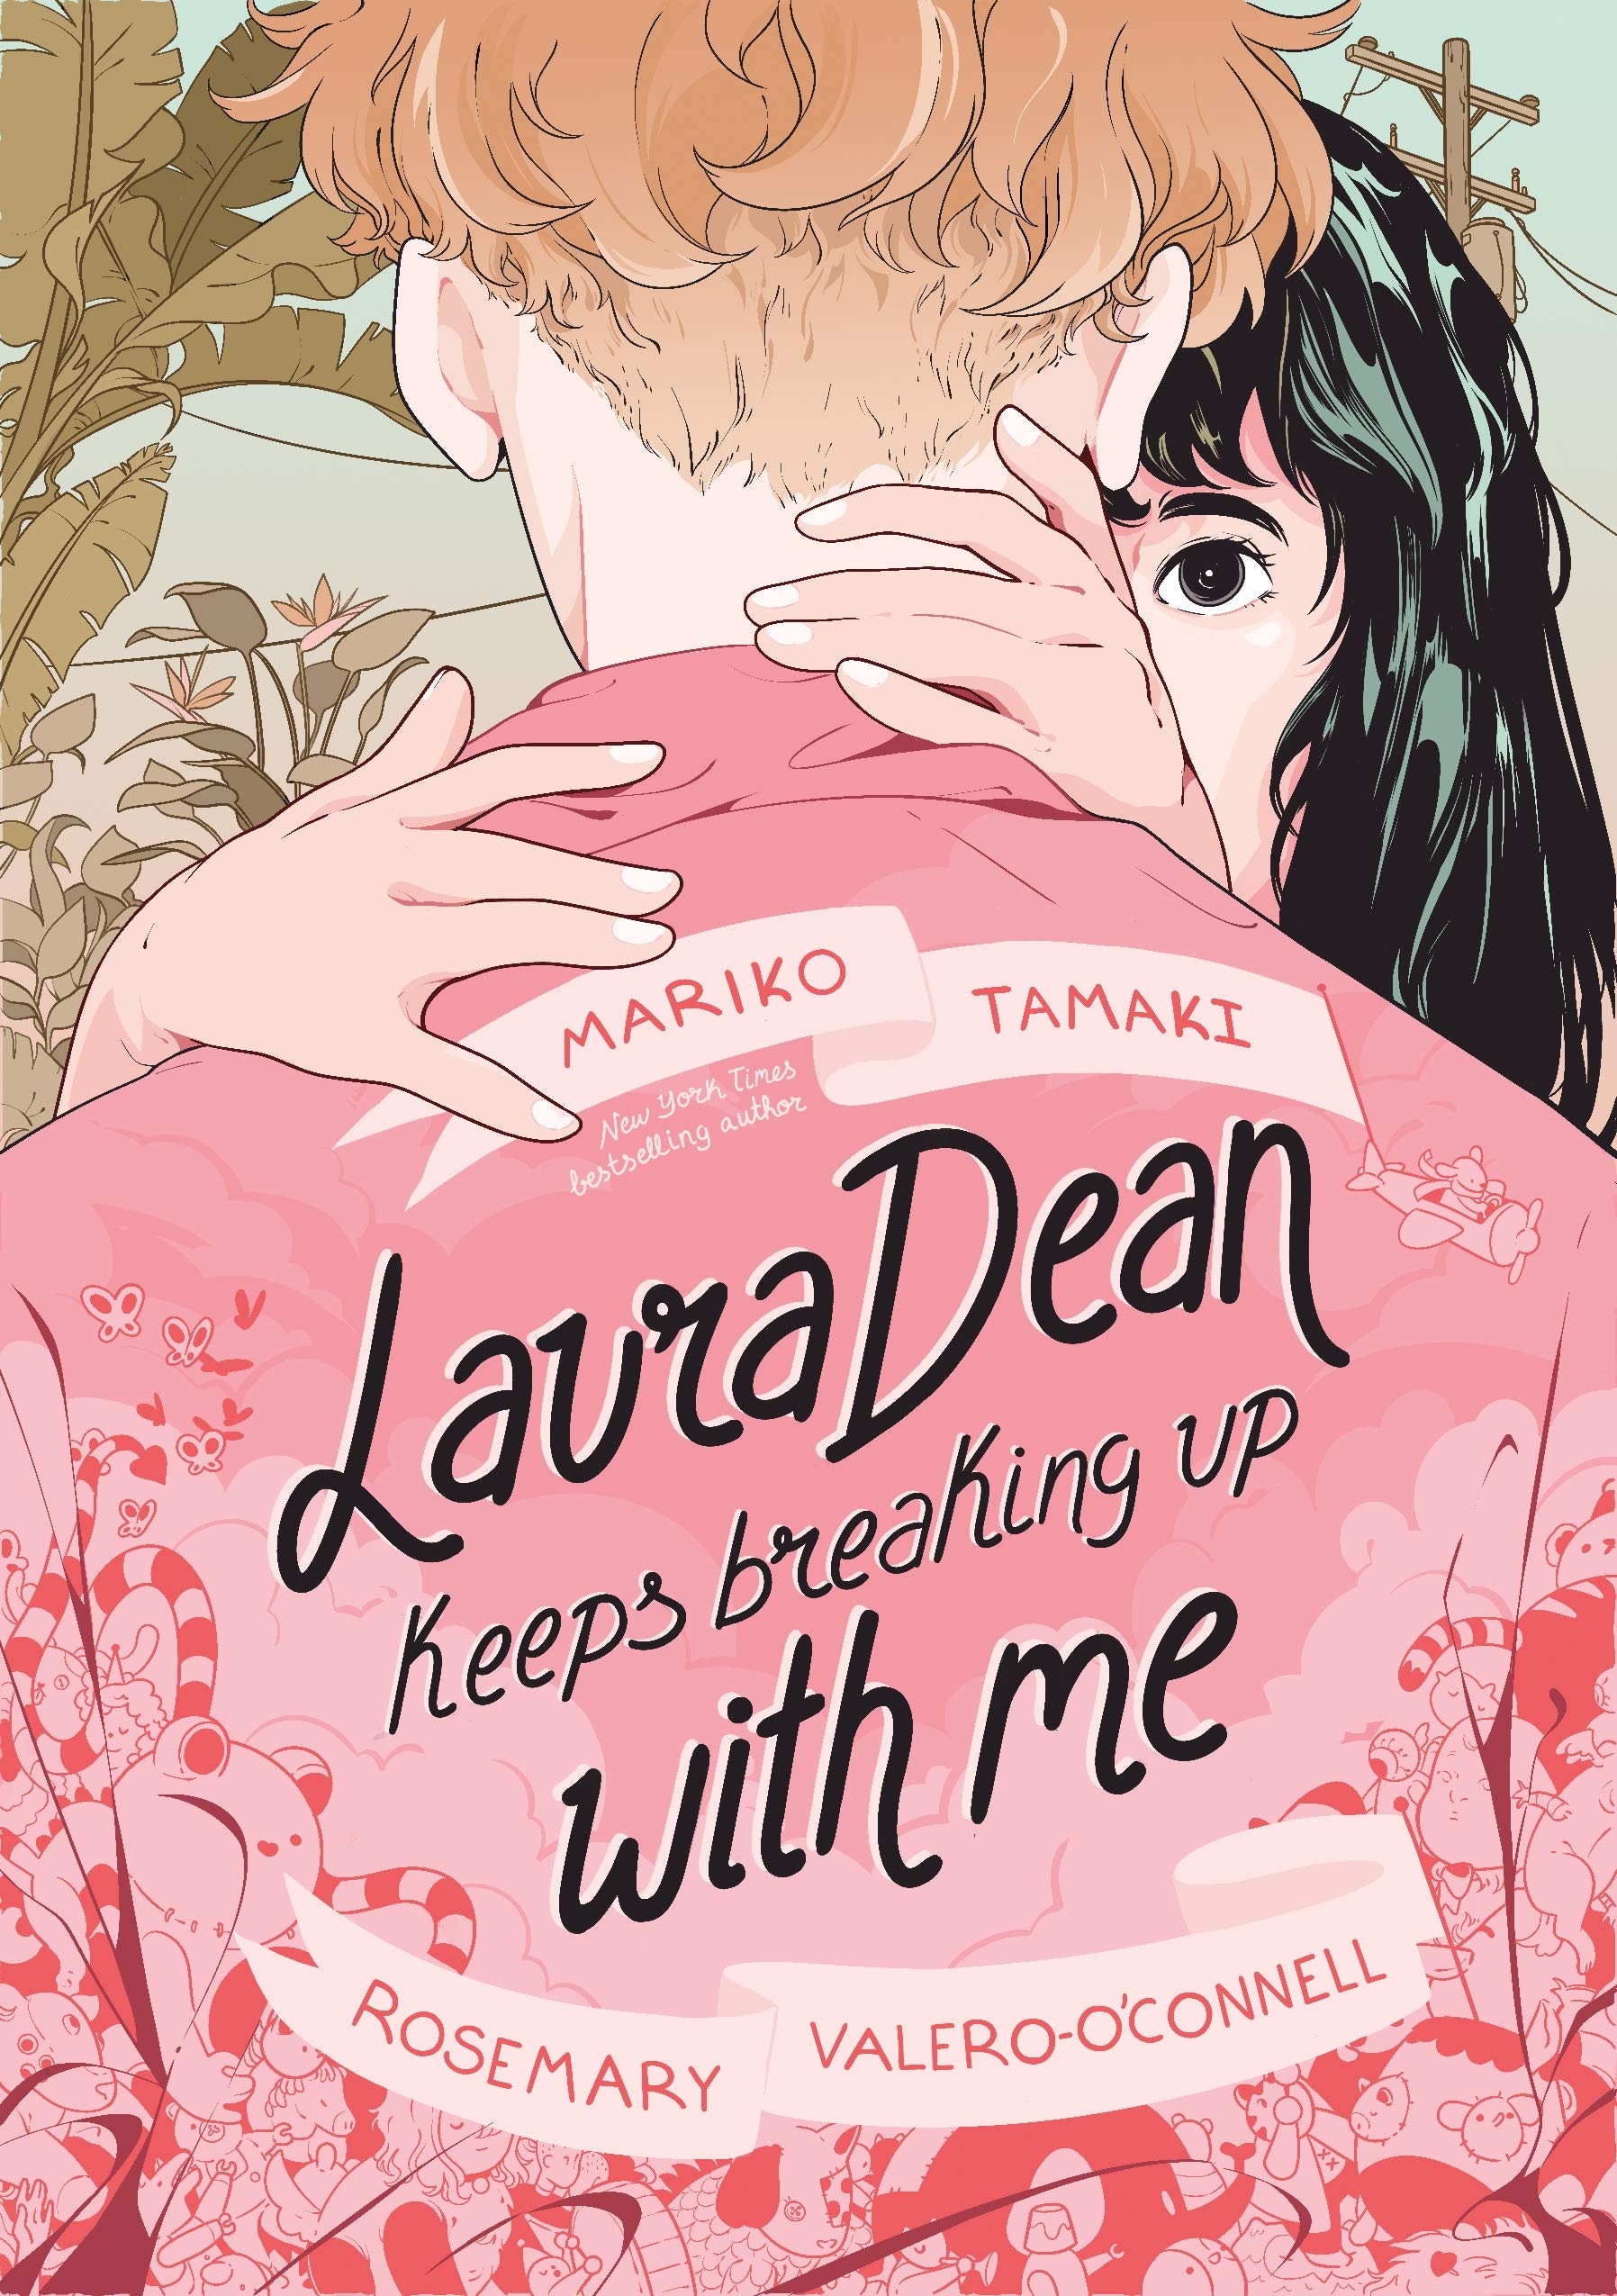 Best Comics of 2019: Laura Dean Keeps Breaking Up With Me